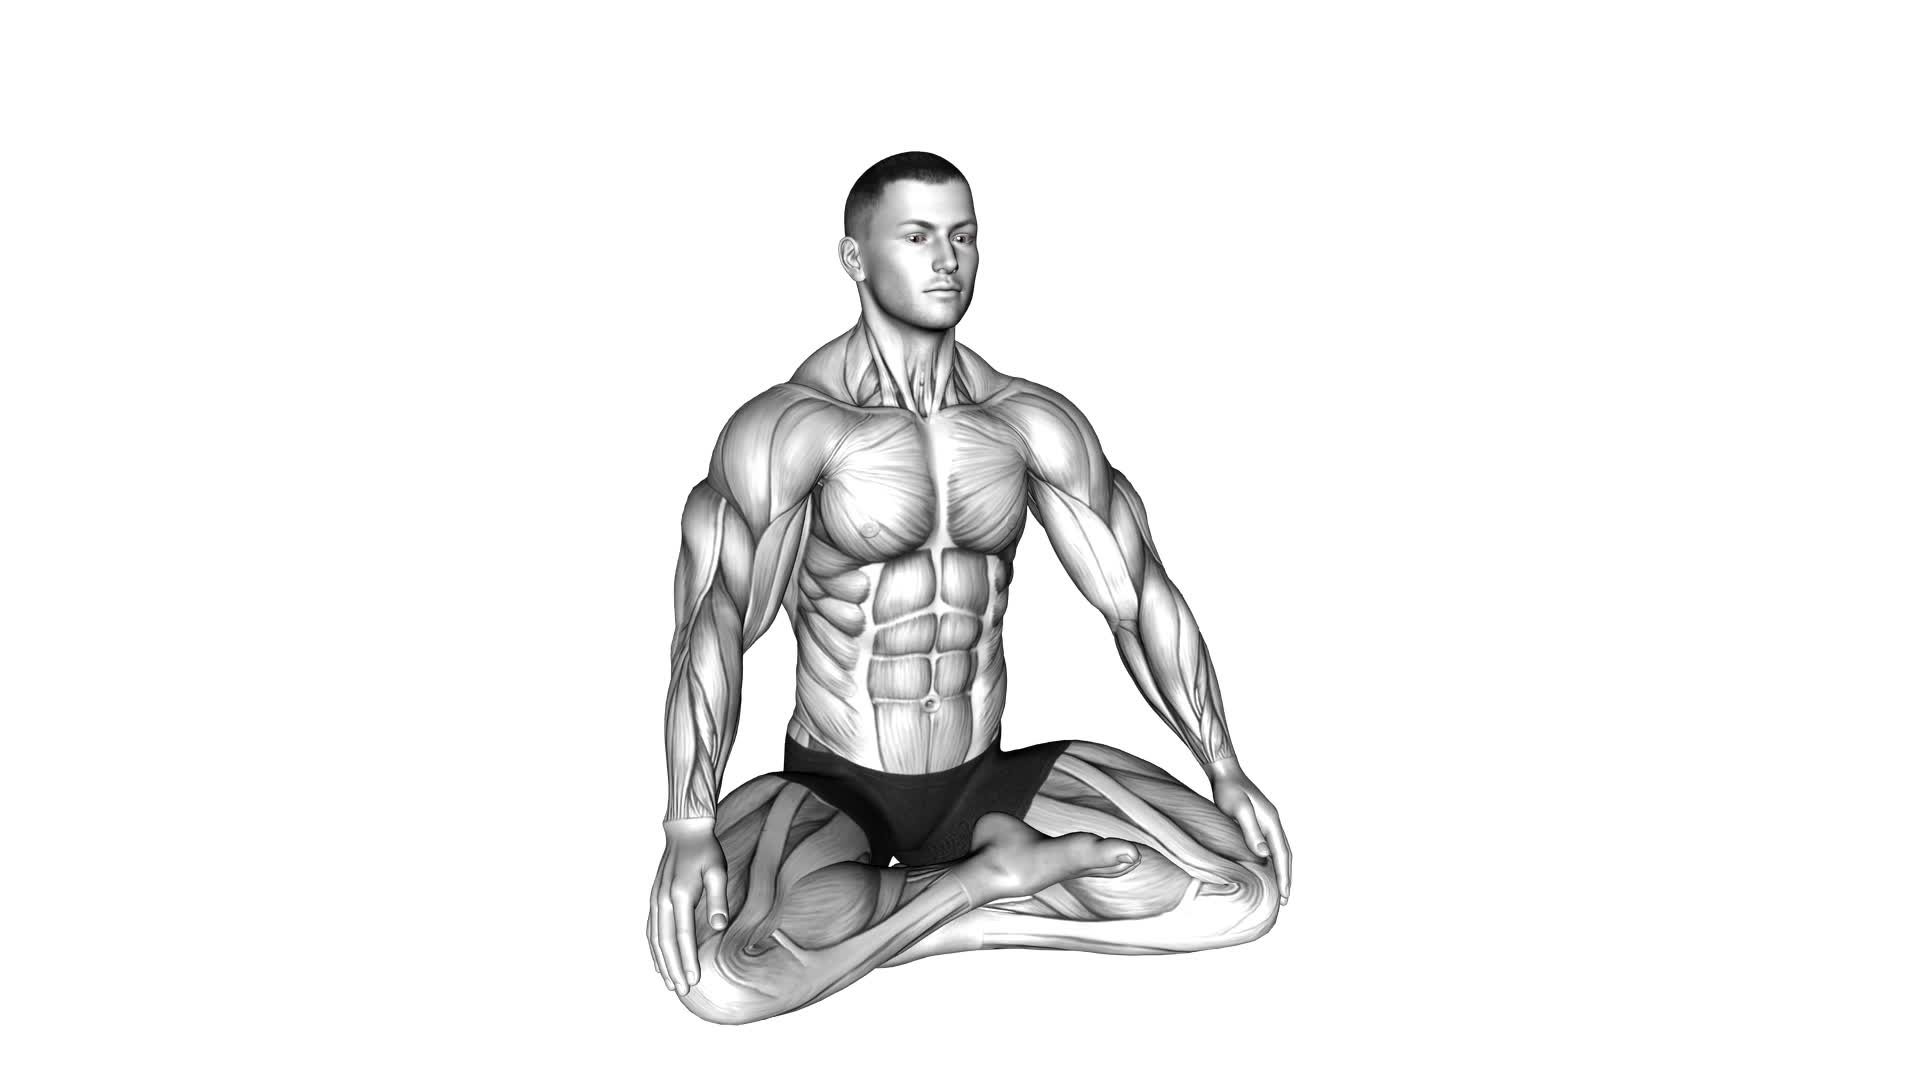 Lotus Pose Breathing (male) - Video Exercise Guide & Tips